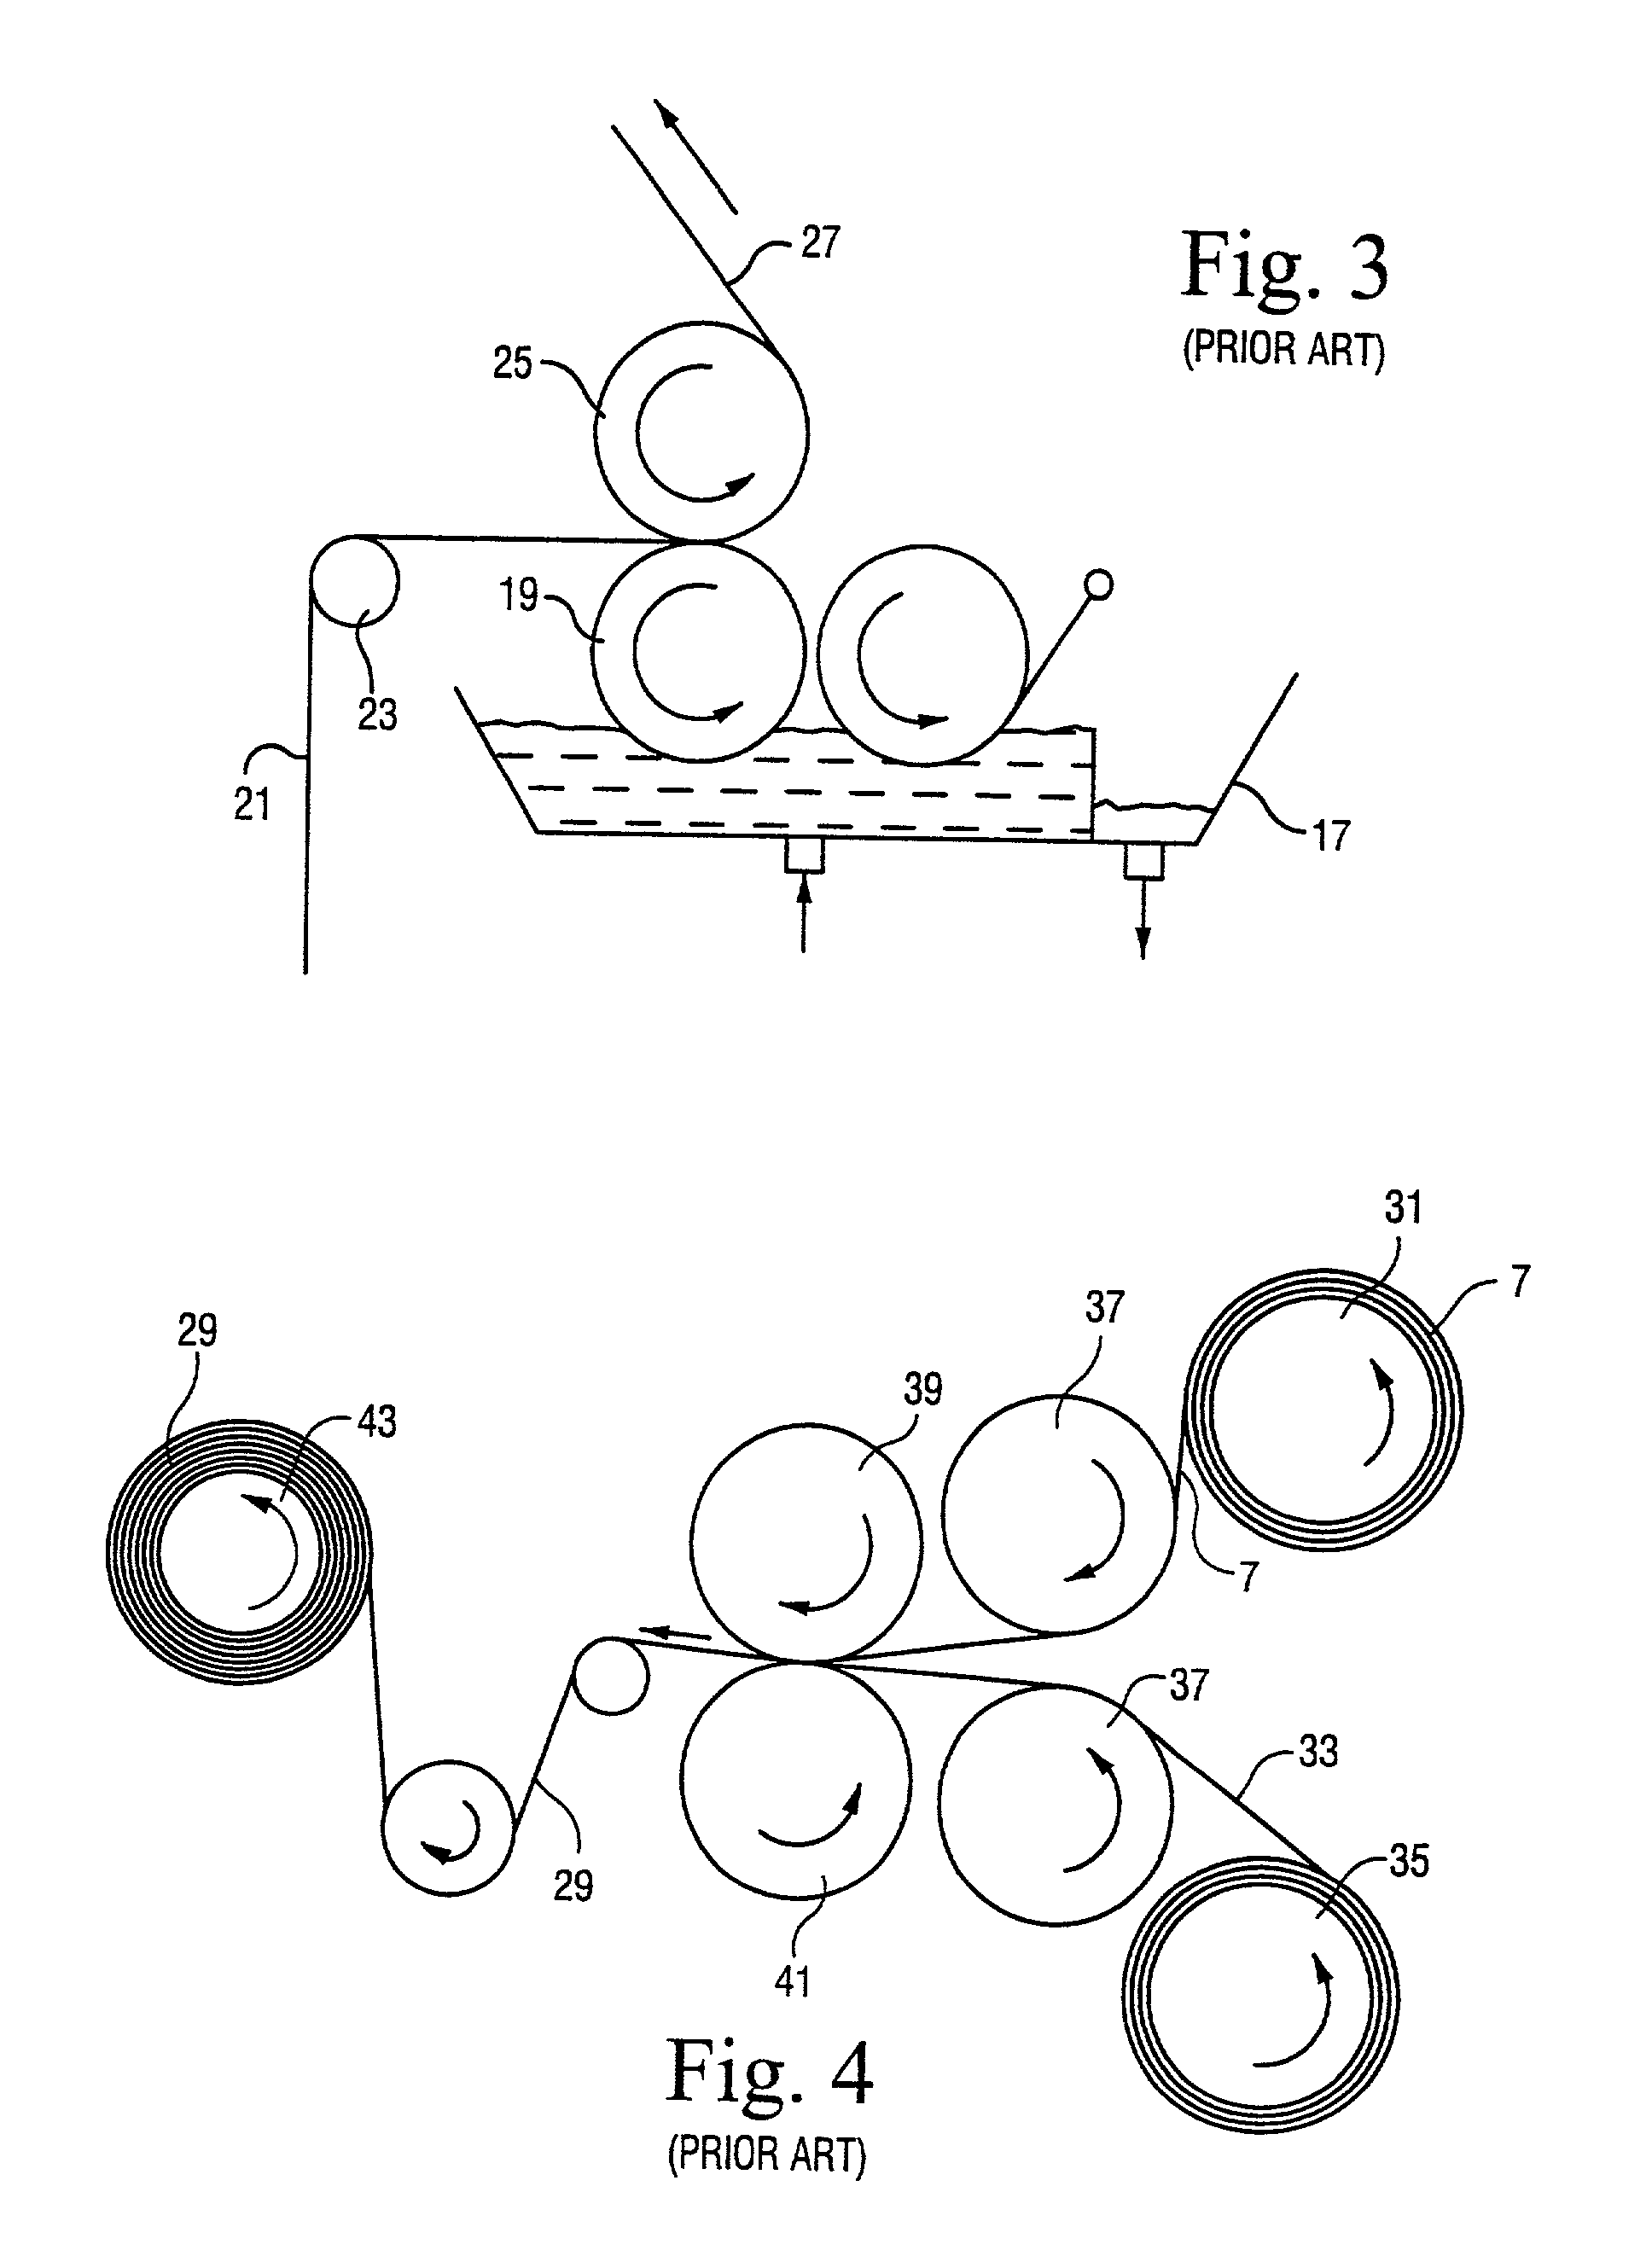 Method of making a colored automotive trim product